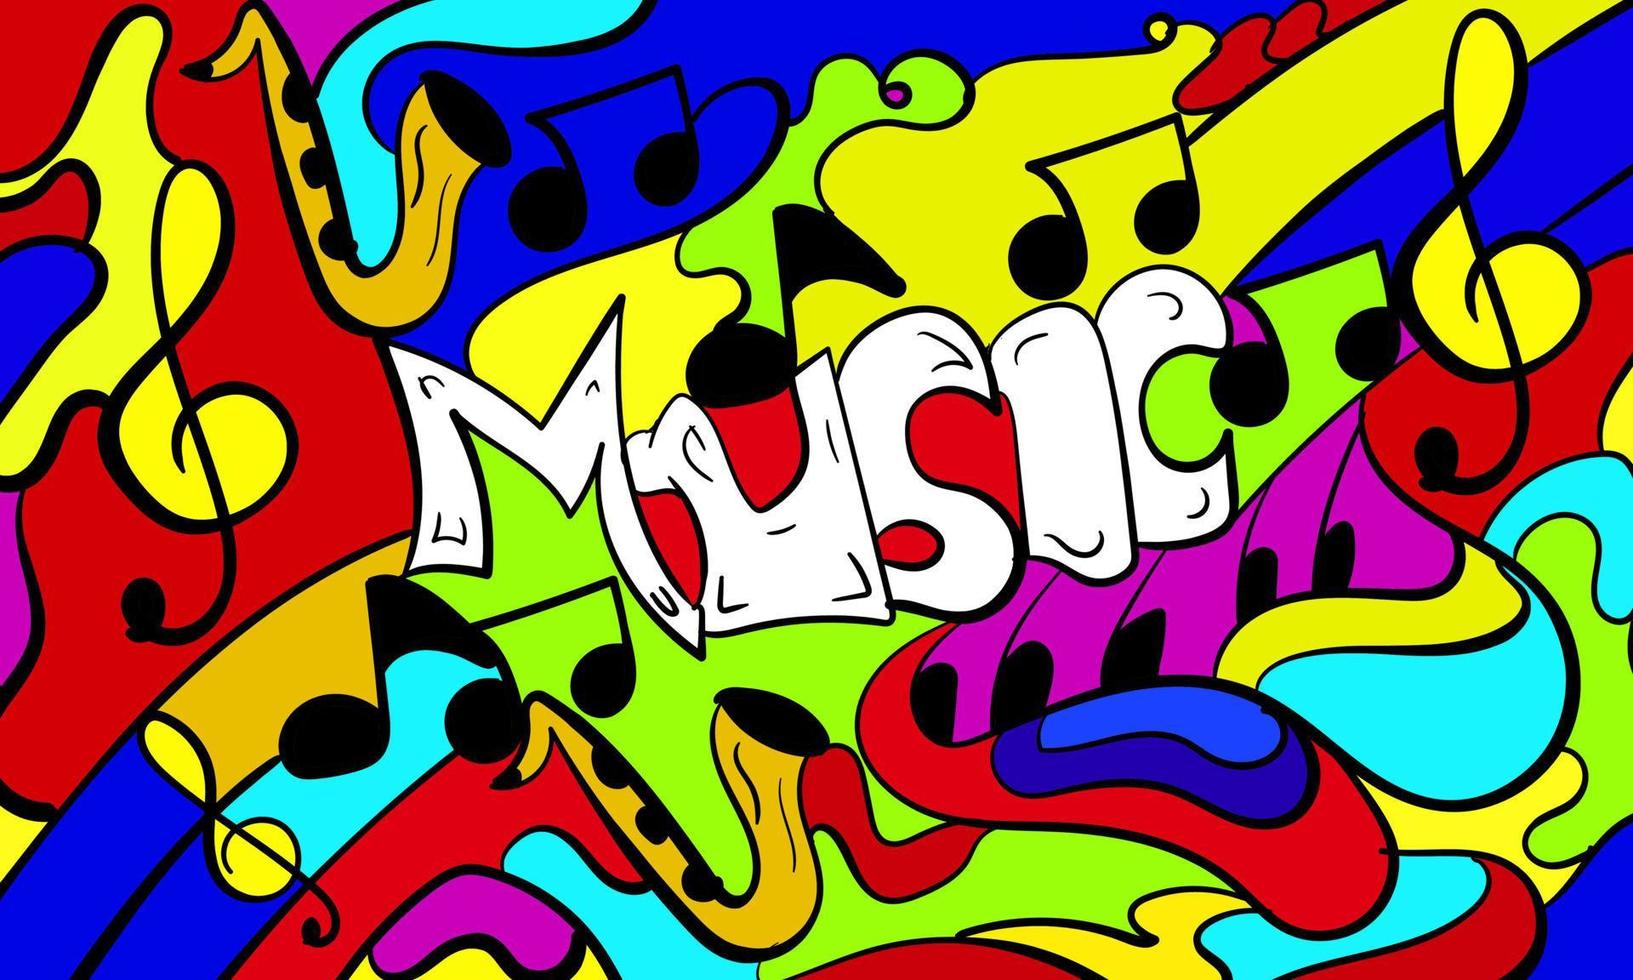 Abstract music doodle hand drawn background design suitable for your company banner and poster design vector